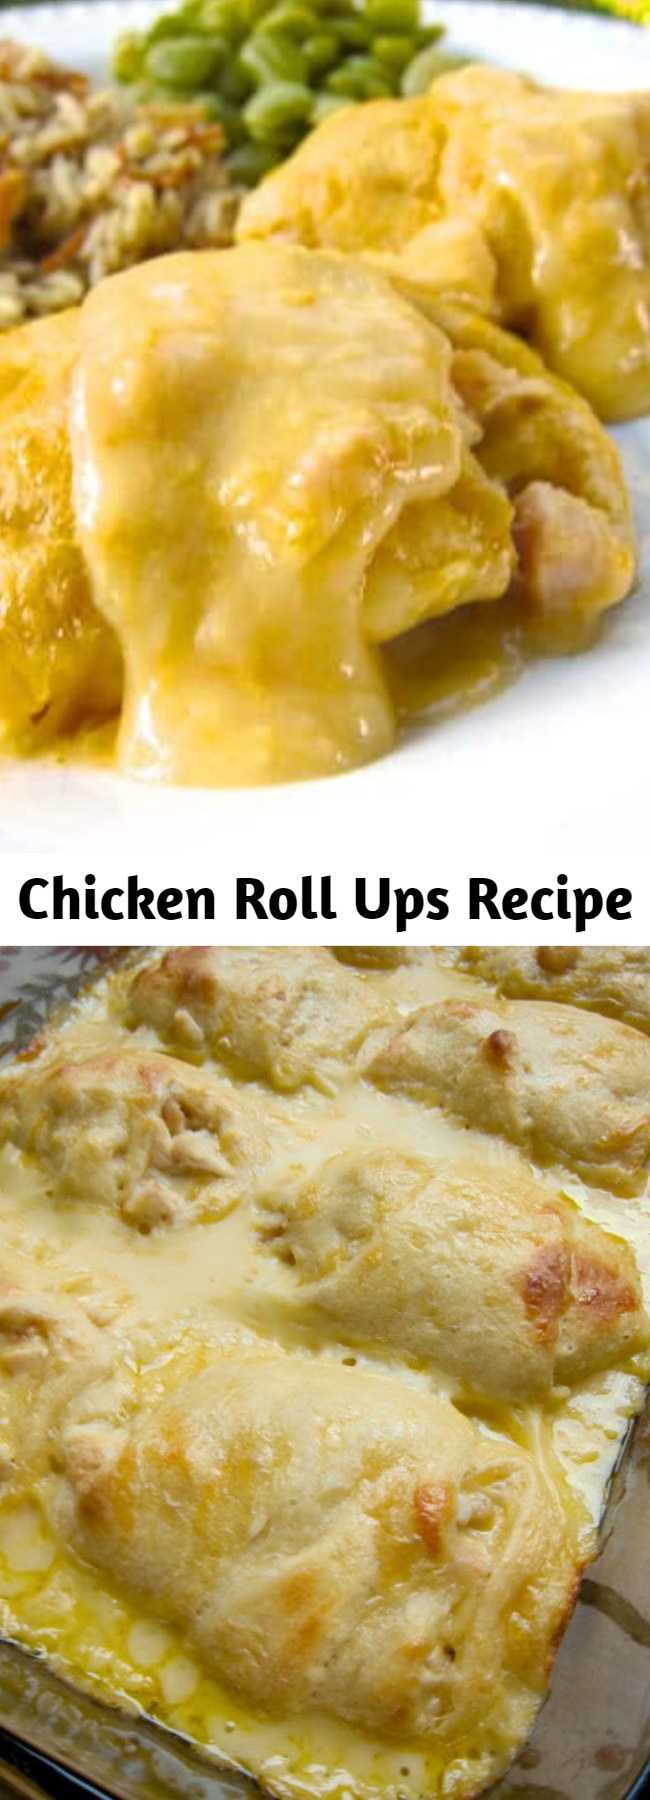 Chicken Roll Ups Recipe - Heaven in a pan... Chicken, cheese, milk, chicken soup and crescent rolls – Only 5 ingredients for a delicious weeknight meal that is ready in 30 minutes! I could eat the whole pan myself!!